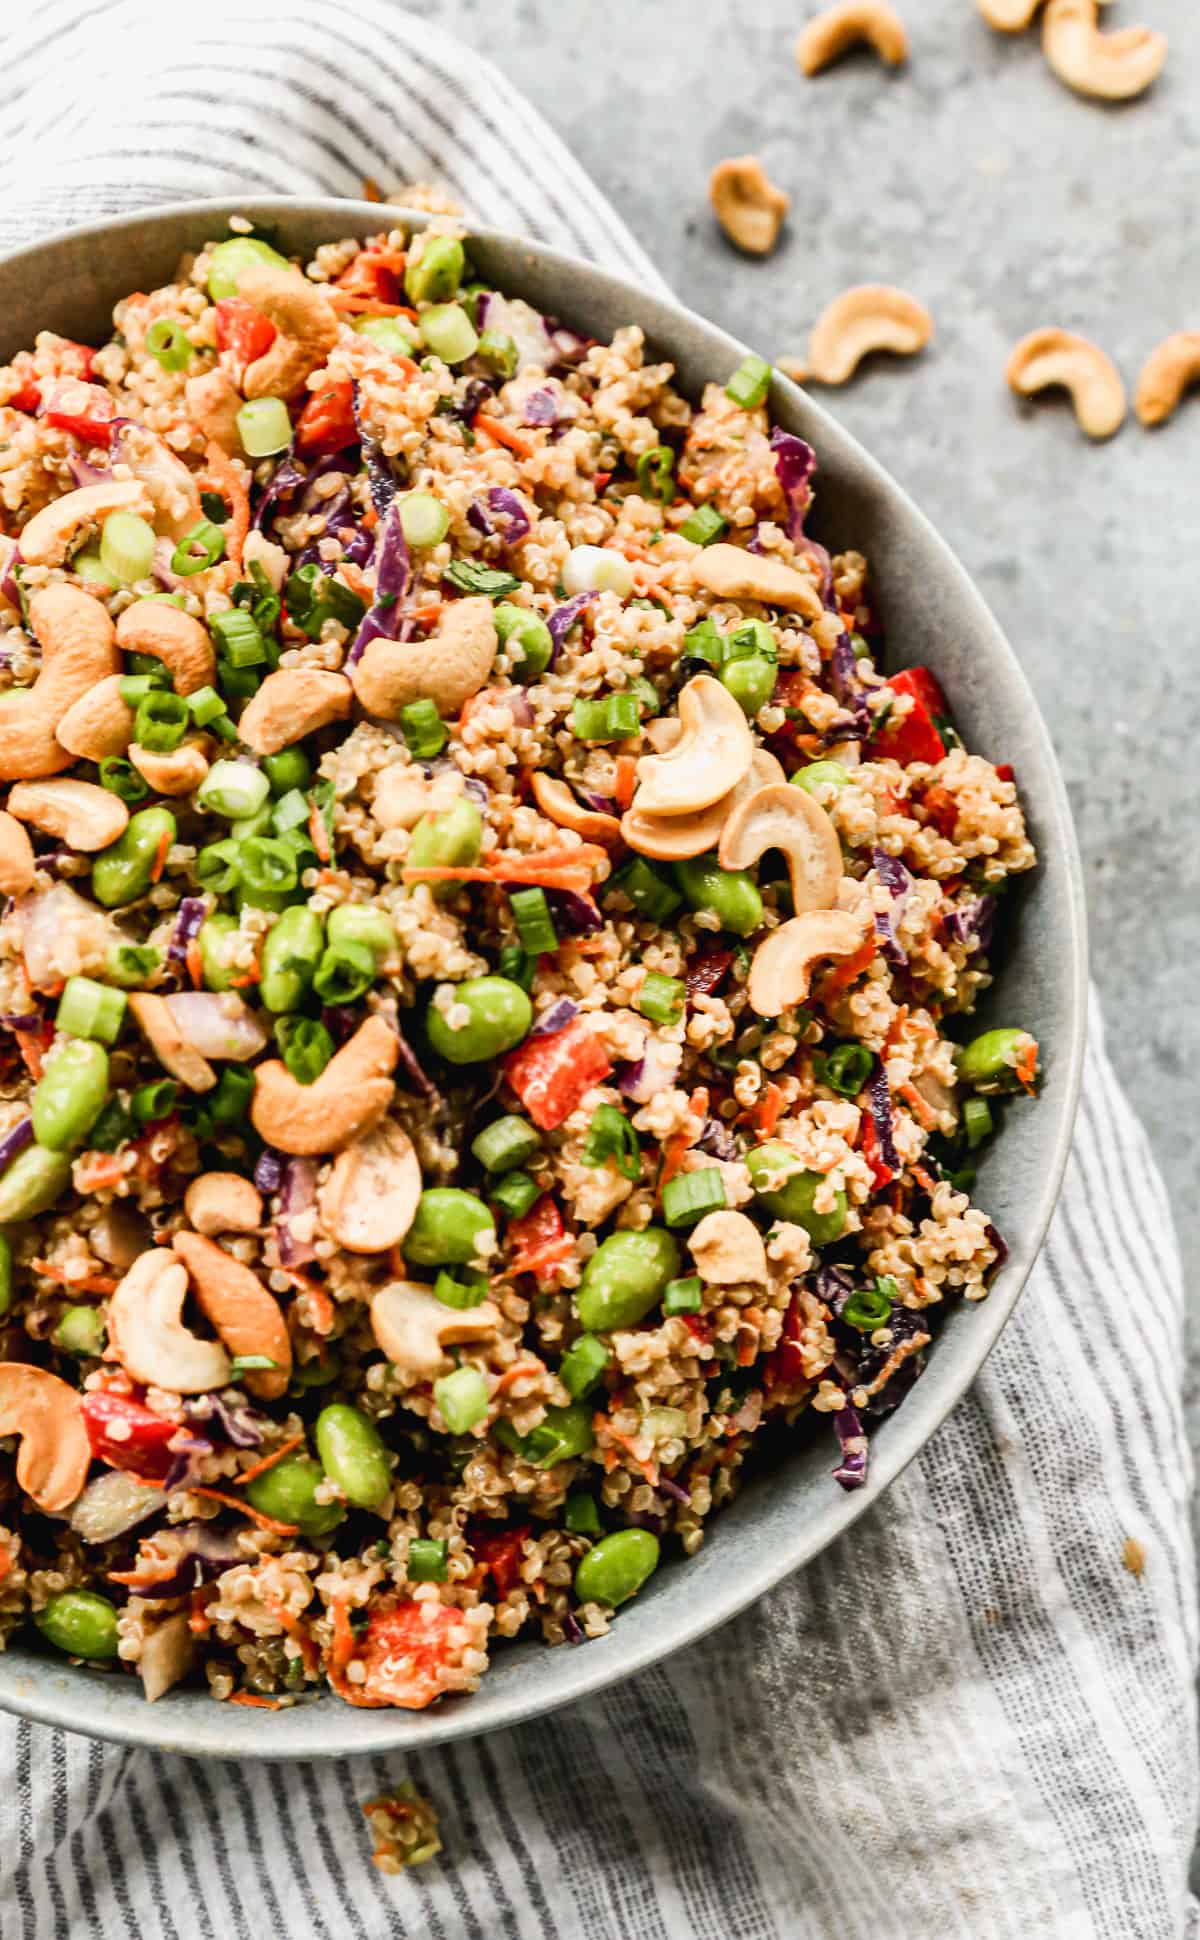 A close up image of a Thai Quinoa Salad in a large bowl, ready to enjoy!